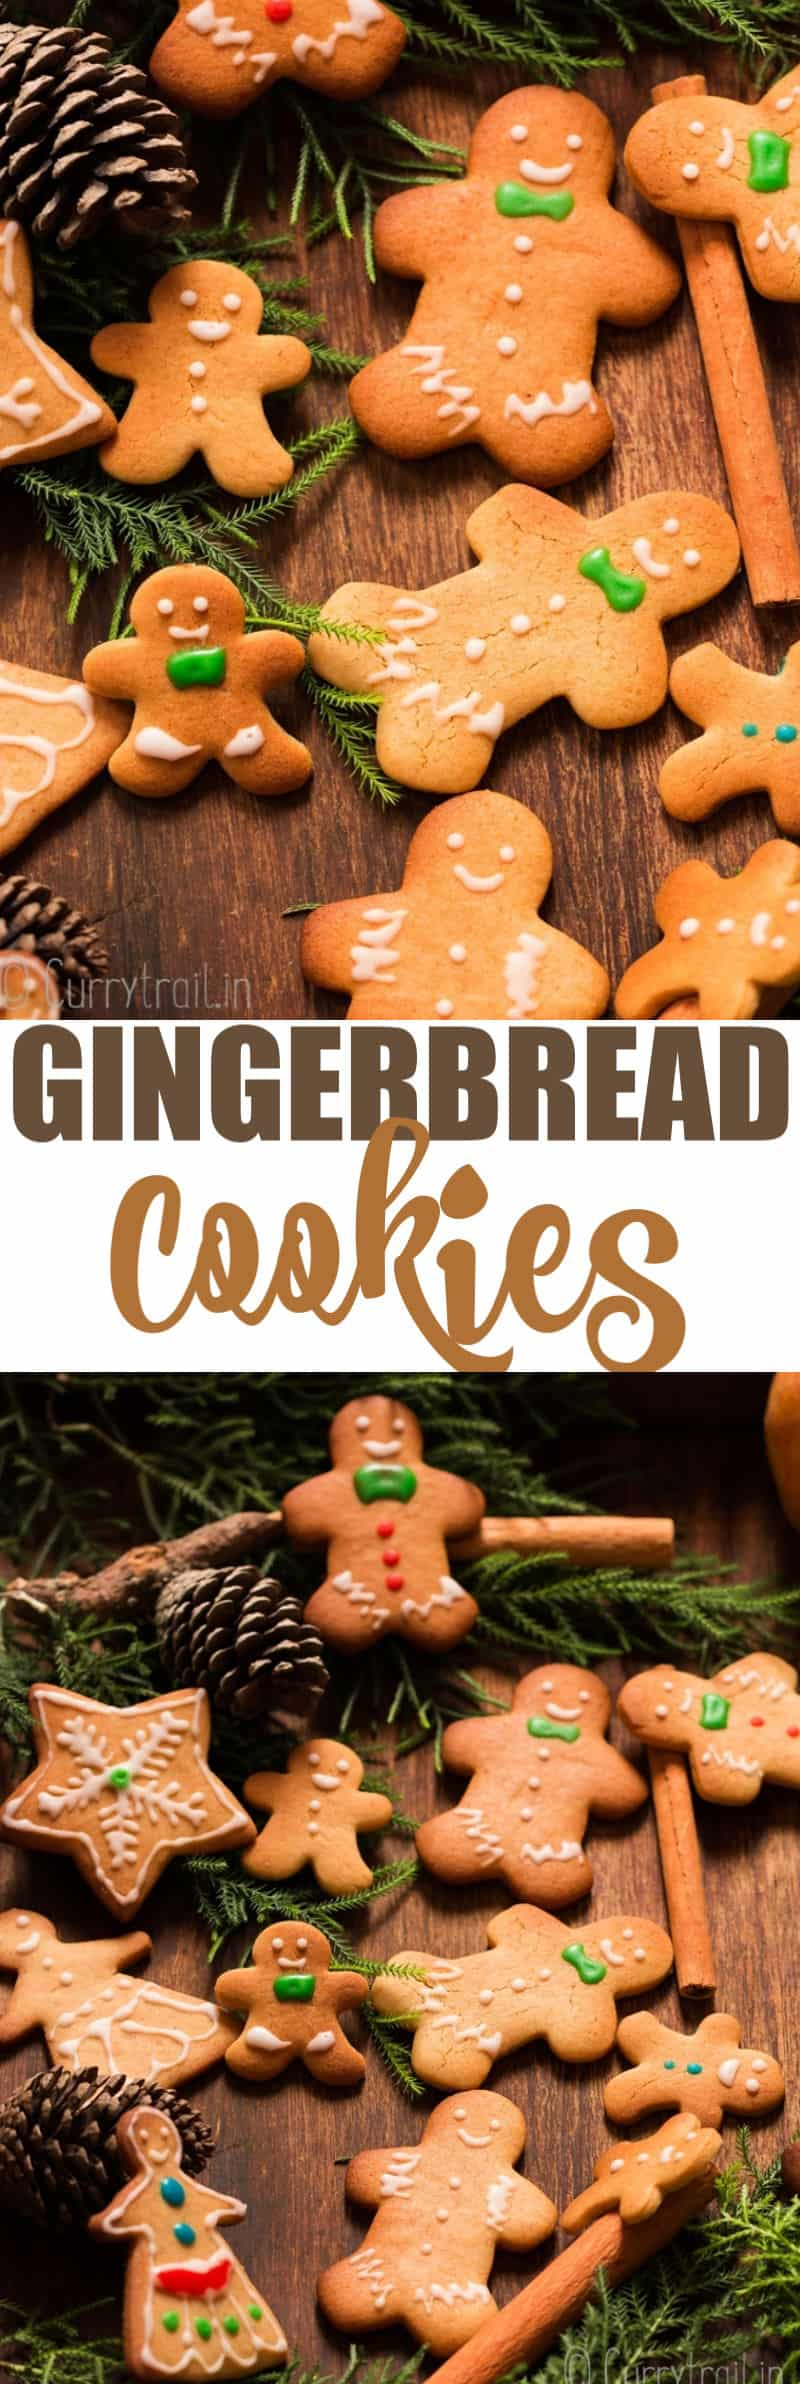 Gingerbread man cookies without molasses - Gingerbread man cookies without molasses -   19 gingerbread cookies without molasses soft ideas